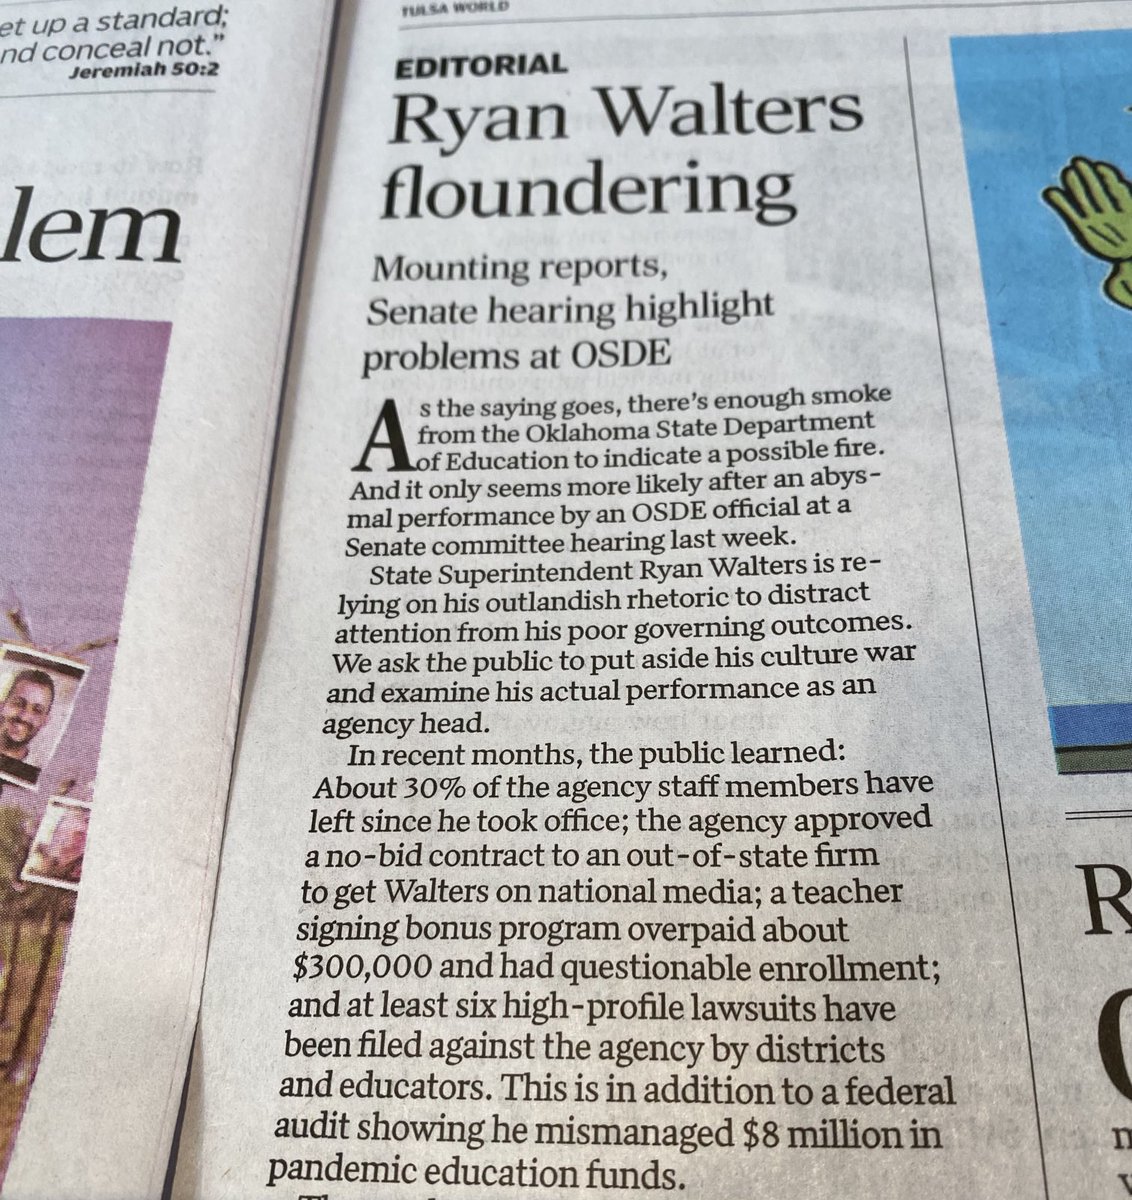 Staff fleeing, inept representatives sent to Legislative meetings, mismanagement of $8M in federal education funds, and seldom, if ever, showing up for work since he’s hired an out of state PR firm to place him on right wing media sites, ⁦@RyanWaltersSupt⁩ is a failure.